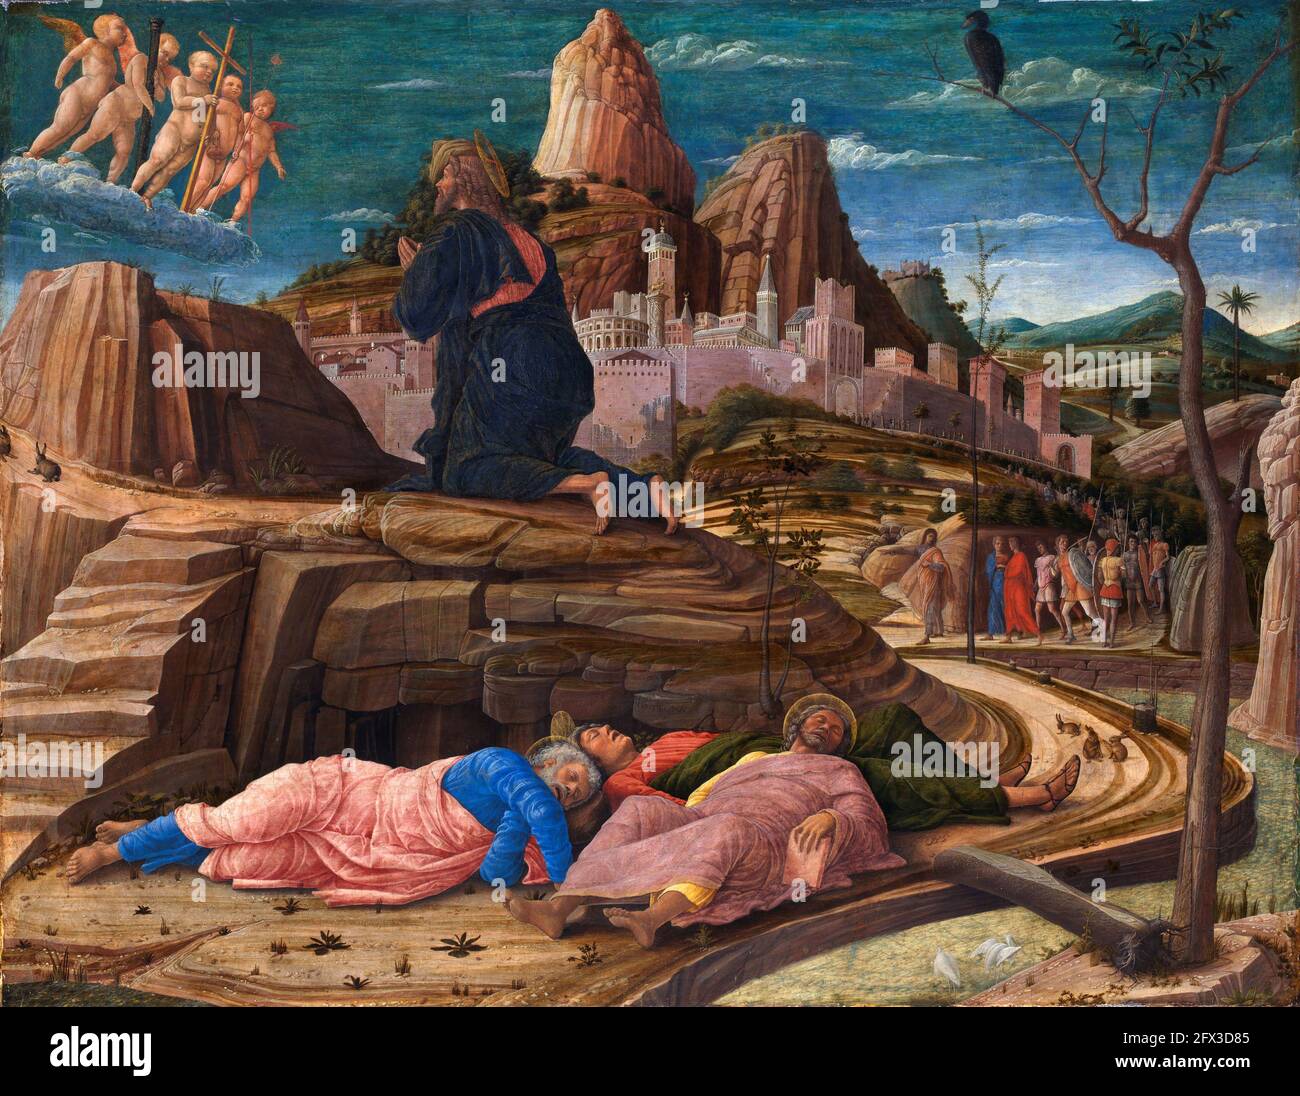 The Agony in the Garden by Andrea Mantegna (1431-1506), egg tempera on wood, c. 1455-56 Stock Photo